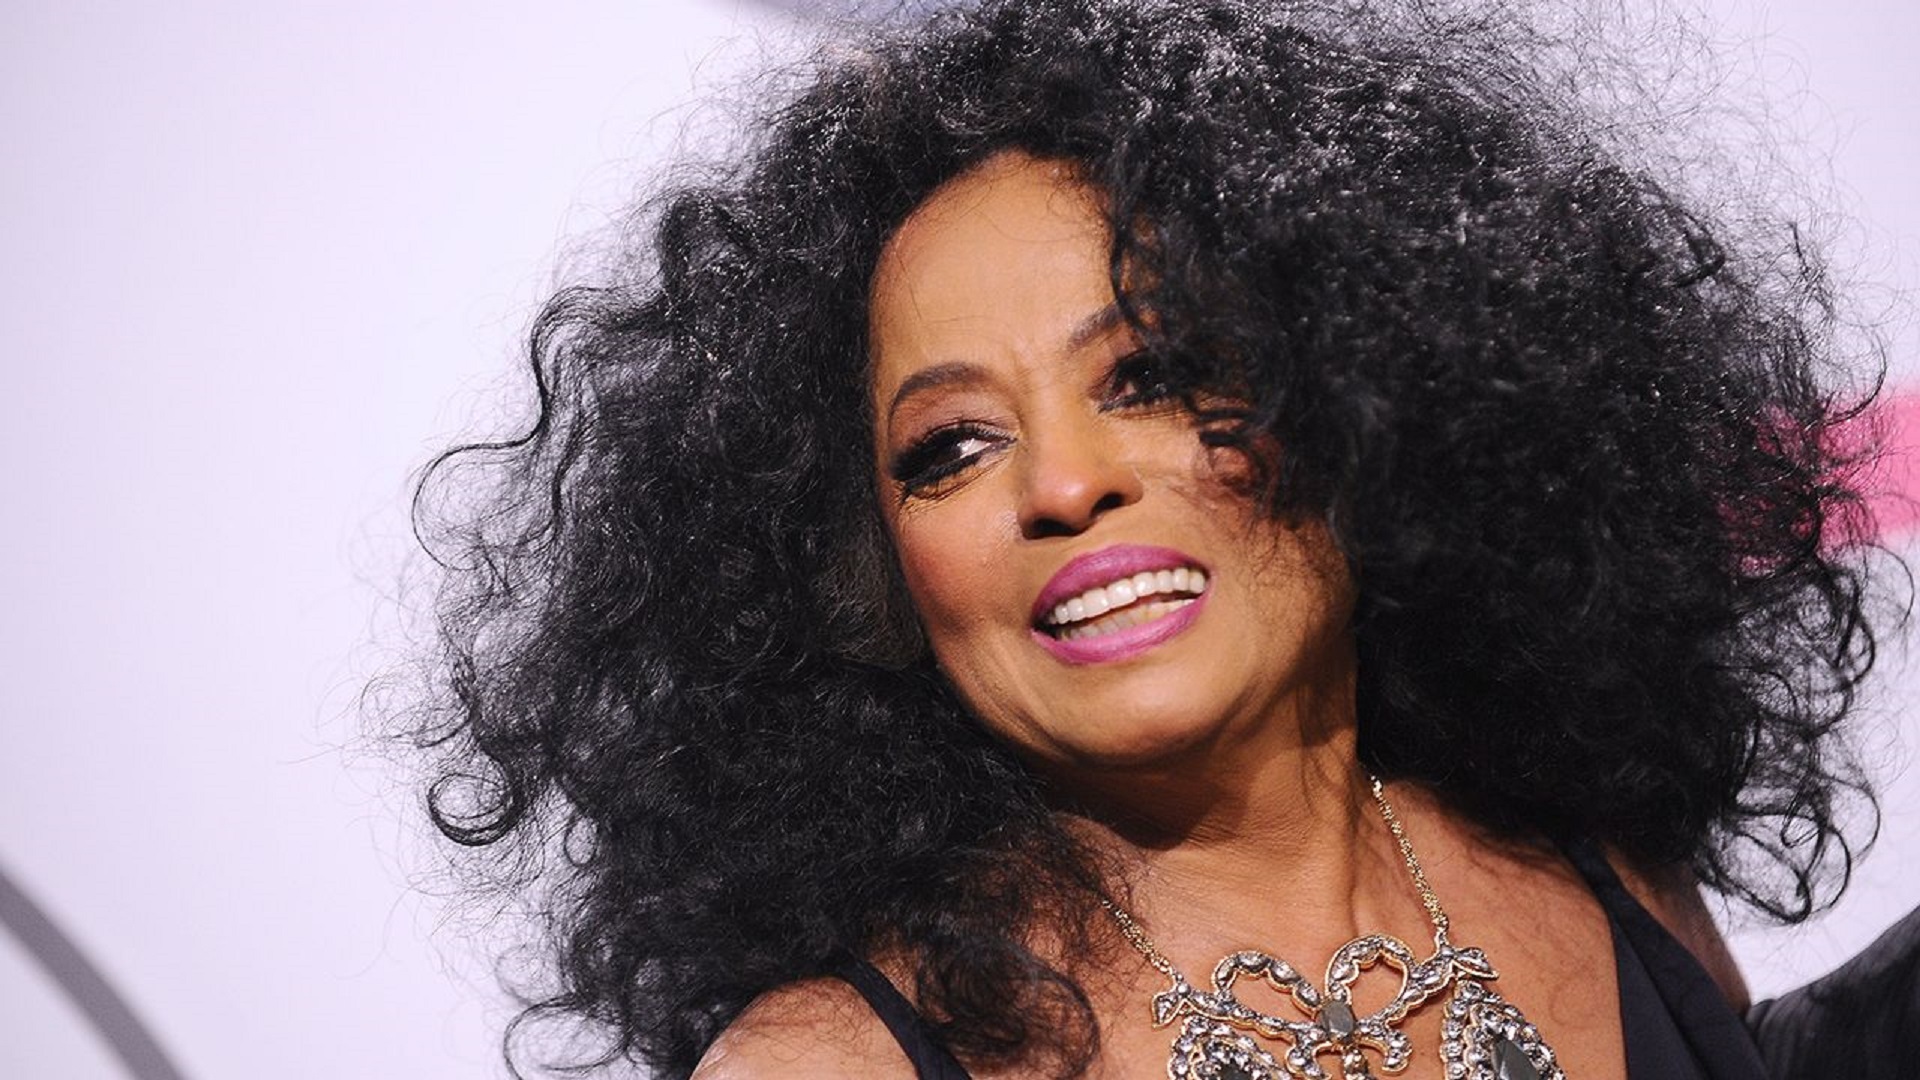 Ya’ll Ready? Diana Ross Is Making a Comeback To Music With New Songs!